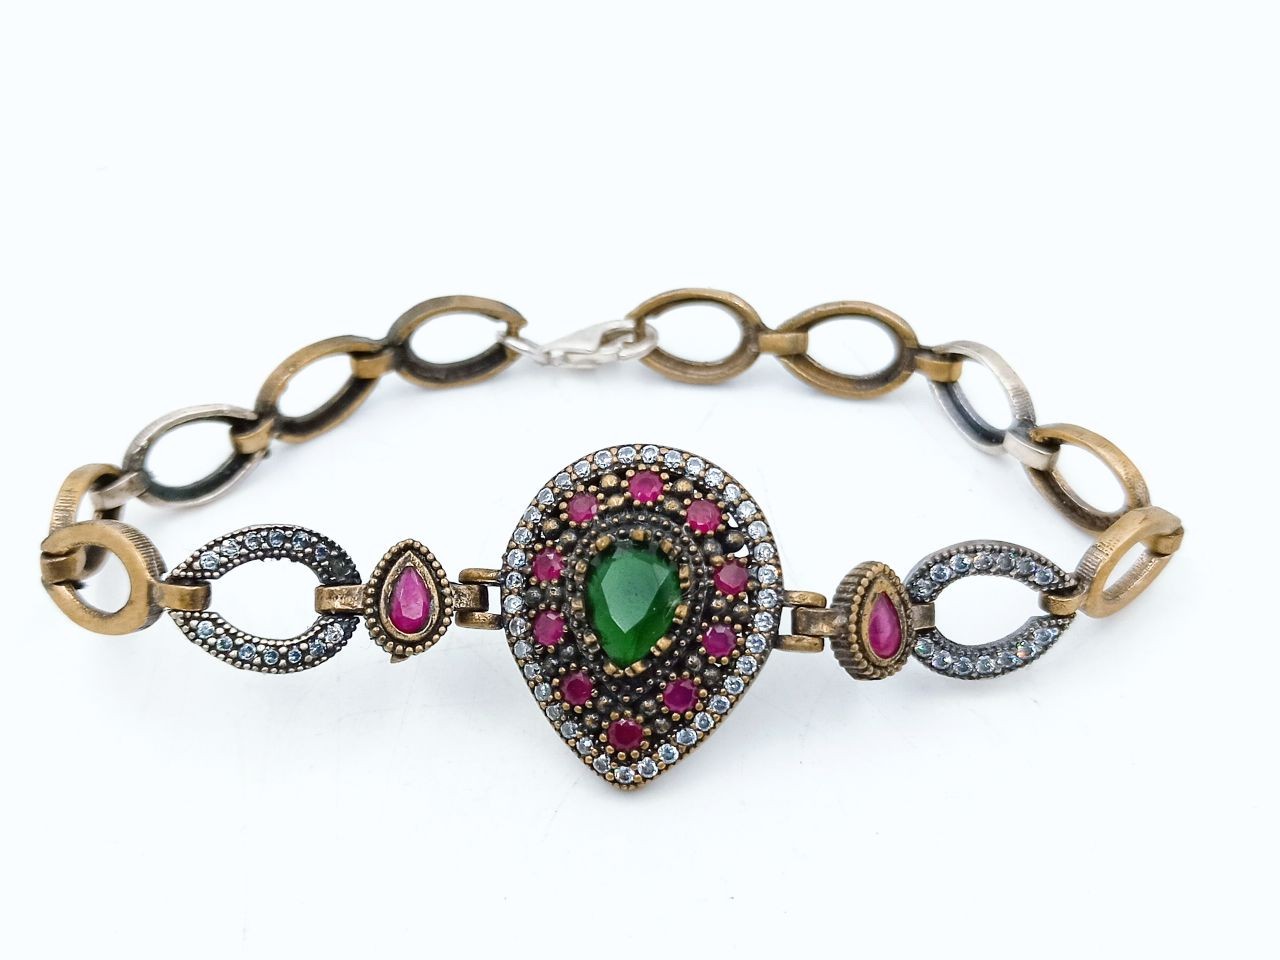 Silver and copper bracelet with rubies and emeralds